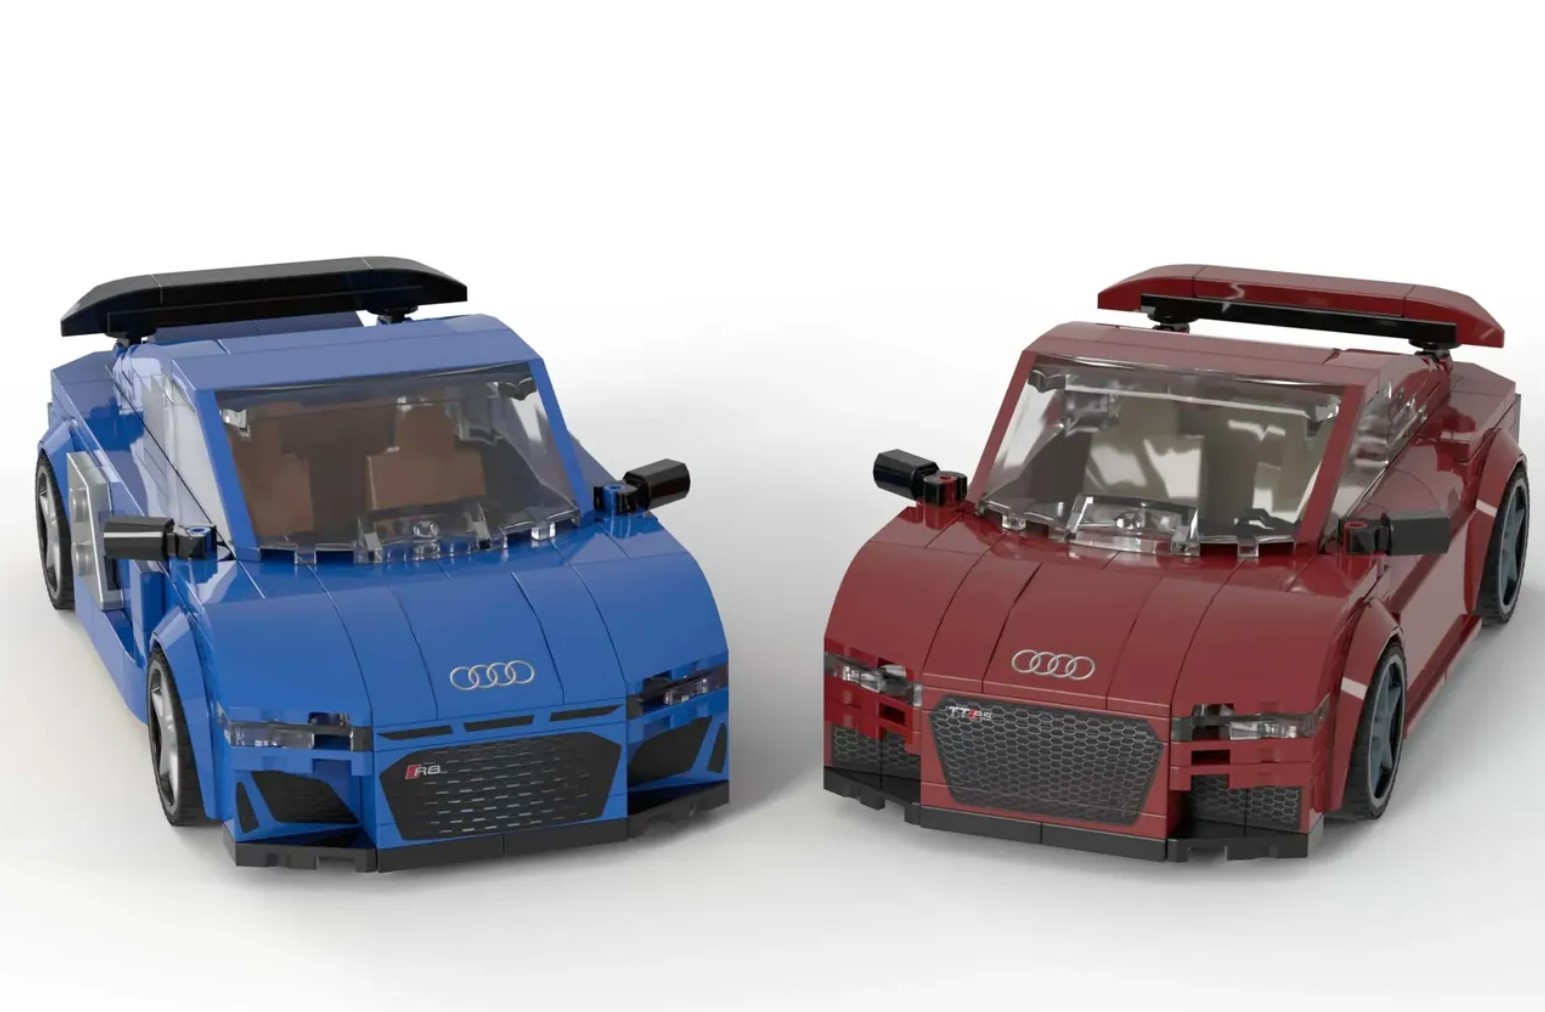 https://s1.cdn.autoevolution.com/images/news/gallery/lego-ideas-audi-showroom-pays-homage-to-two-departing-icons-the-tt-and-the-r8_4.jpg